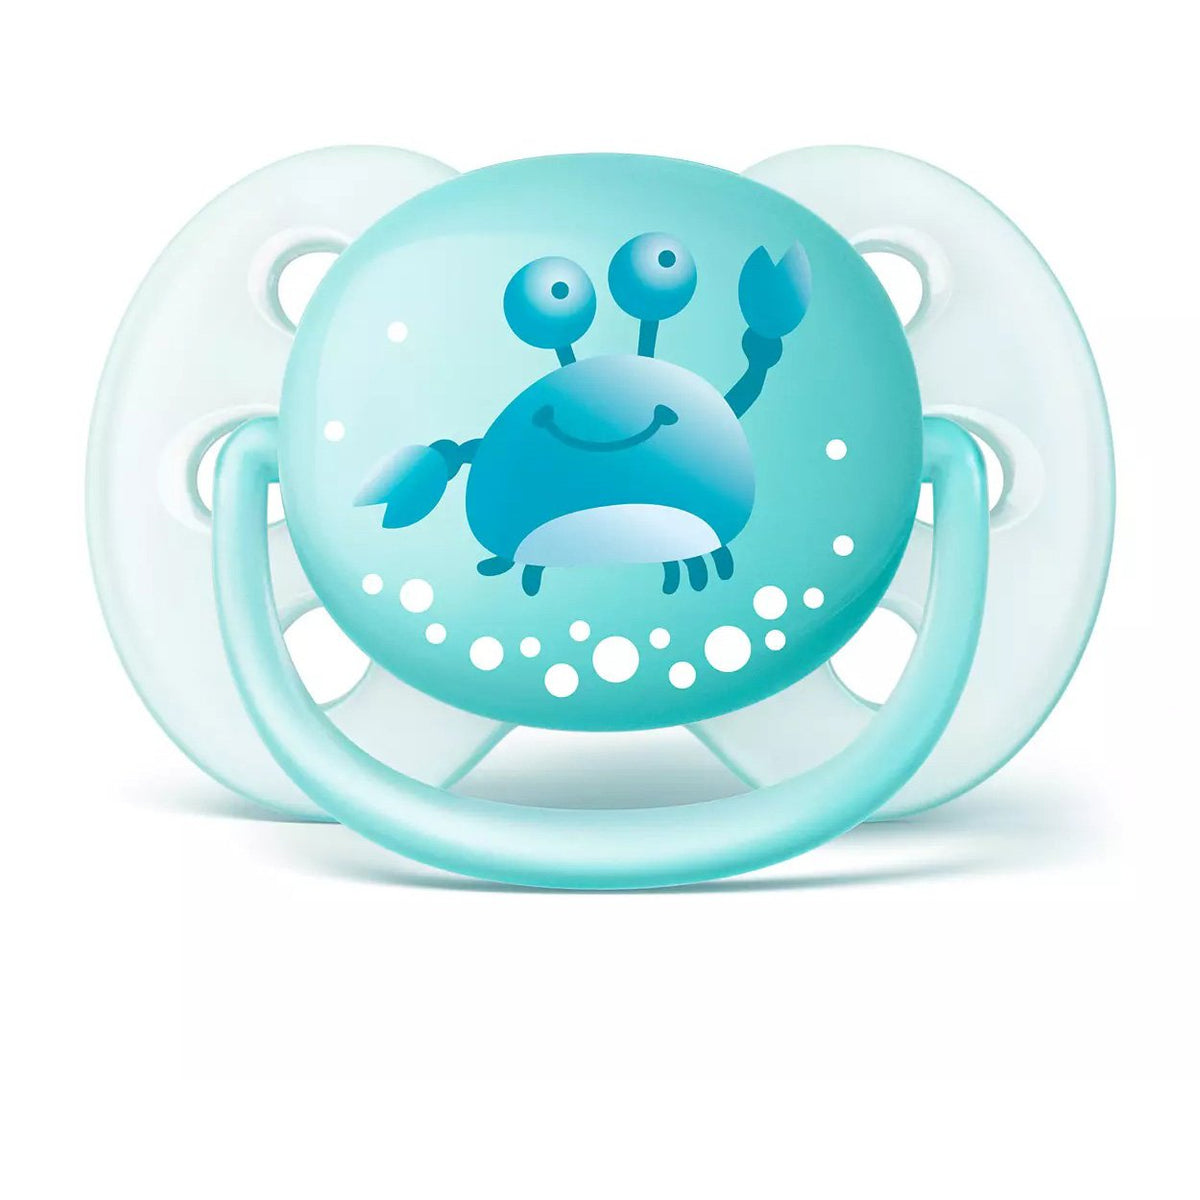 philips-avent-ultra-soft-pacifier- (5)